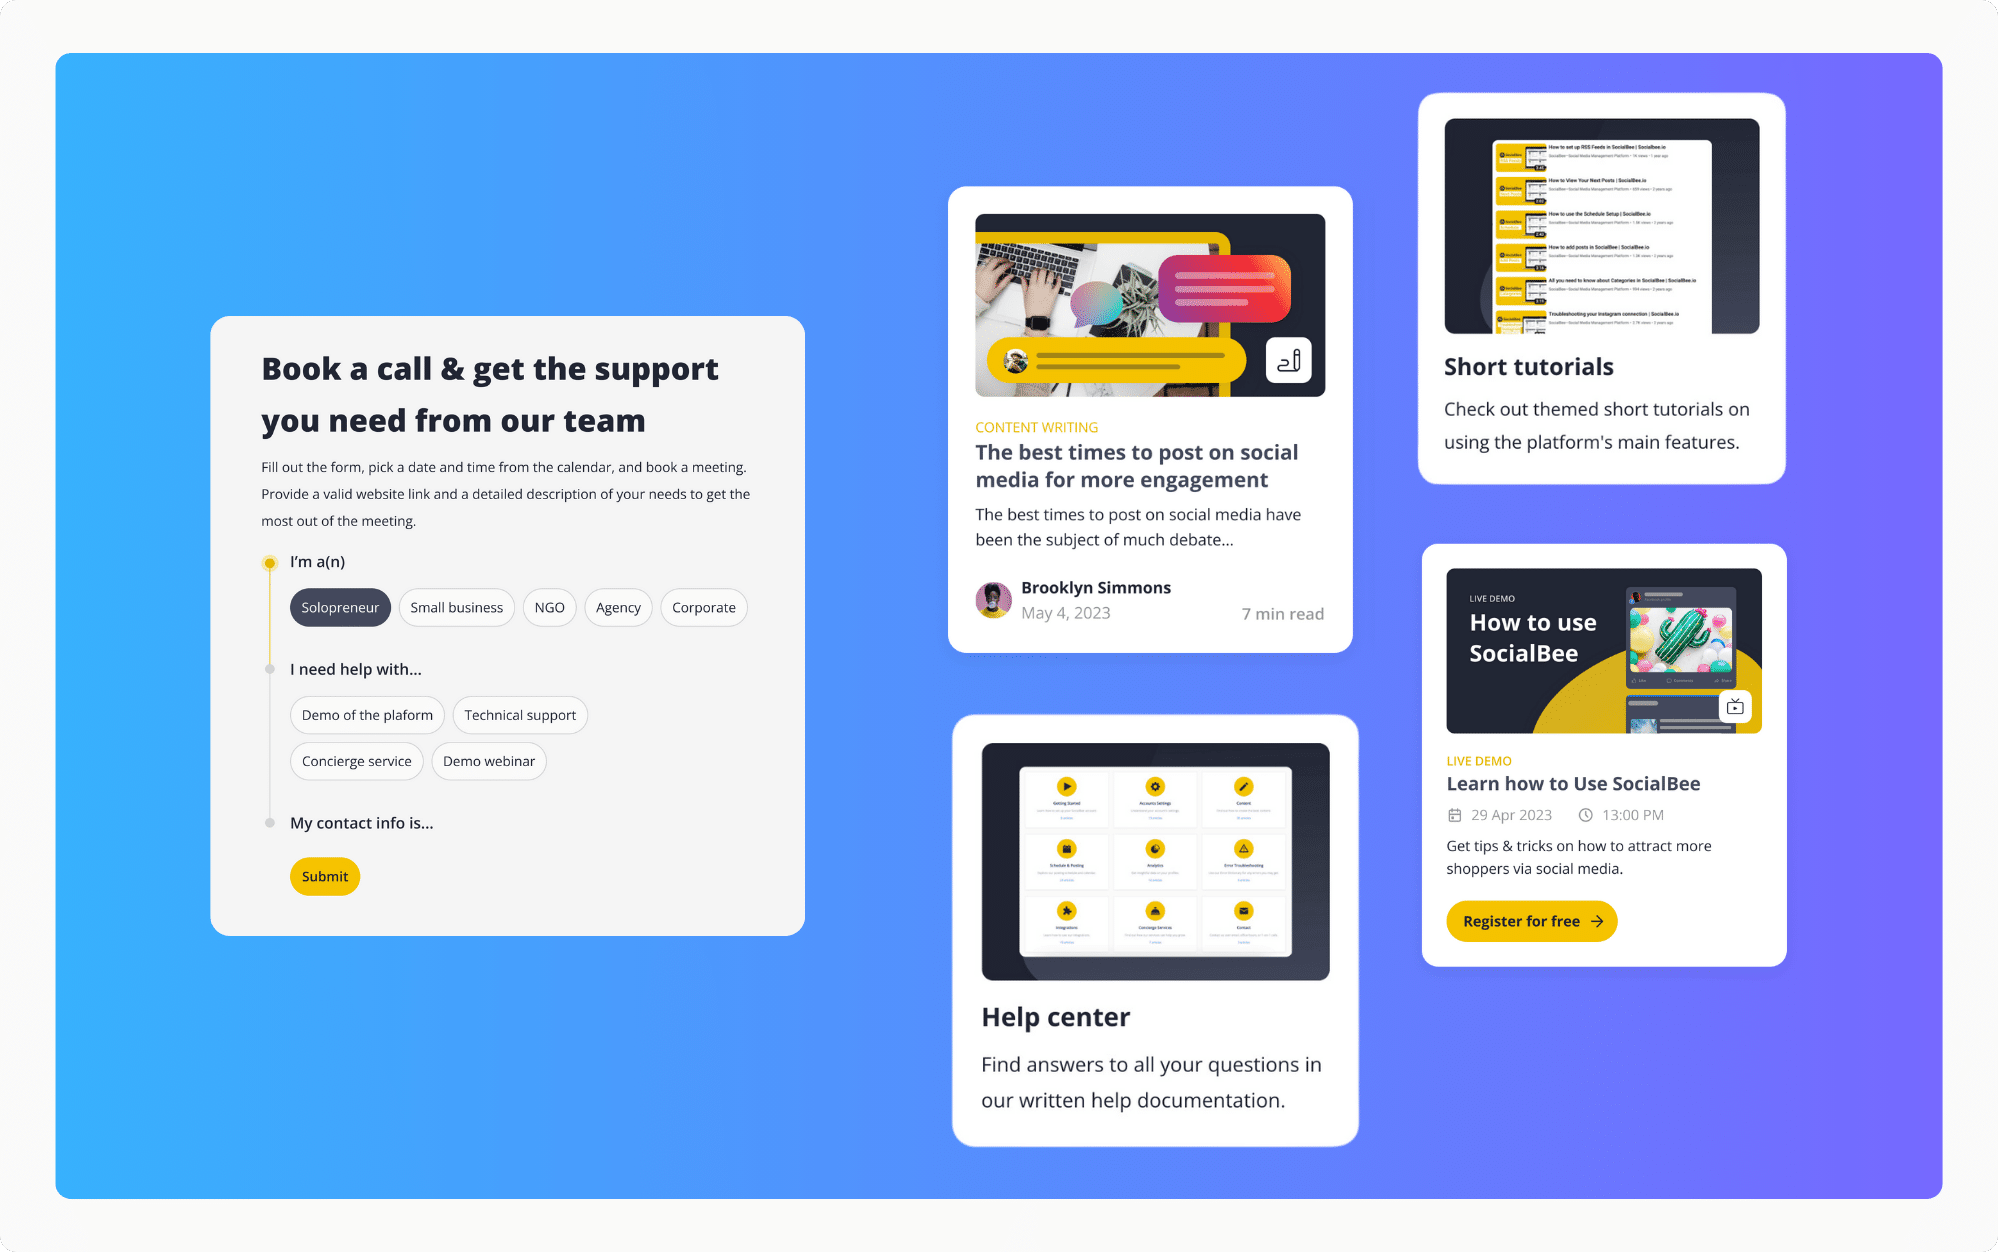 SocialBee customer support resources